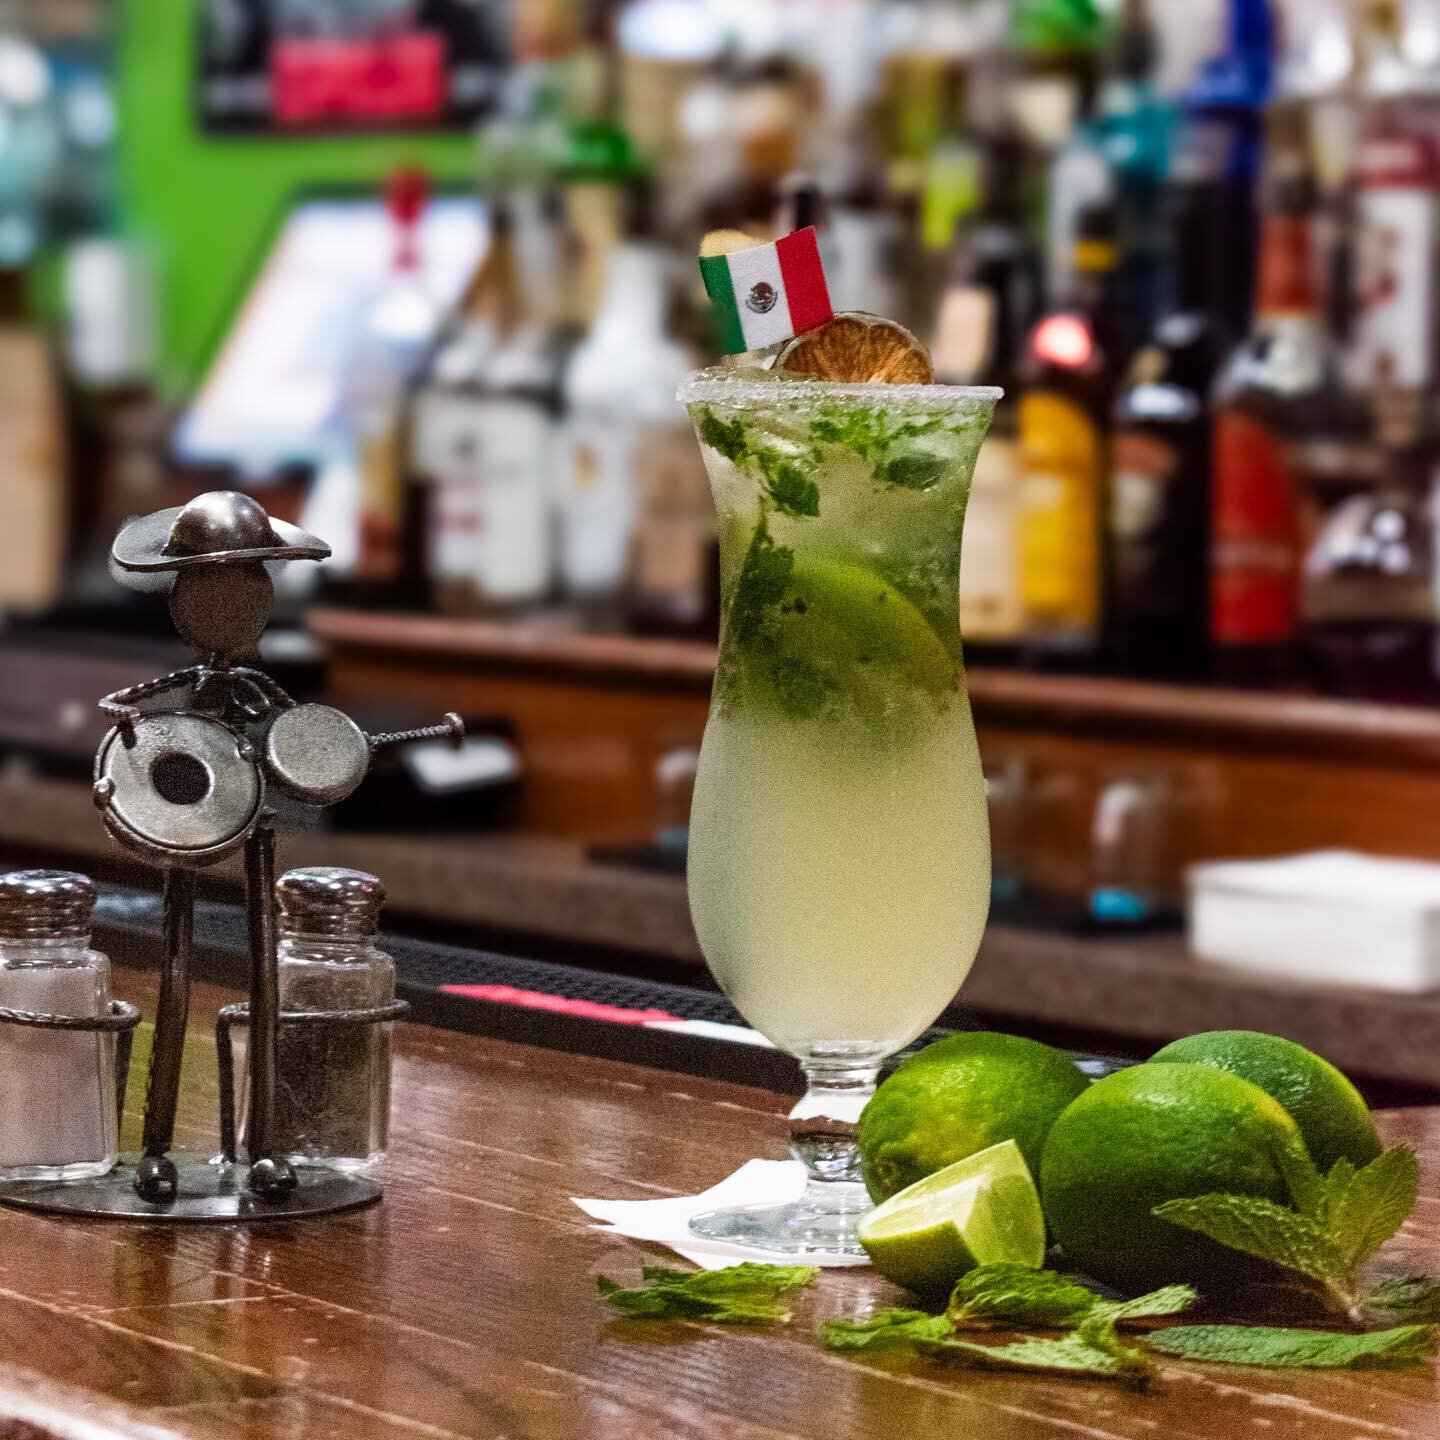 Our handcrafted Mojitos are served with the perfect touch of freshness 🍹👏
.
.
.
#mojito #mojitotime  #bostonfoodies #southshorema #MexicanEats #AuthenticMexican #stoughtonma #MassachusettsEats